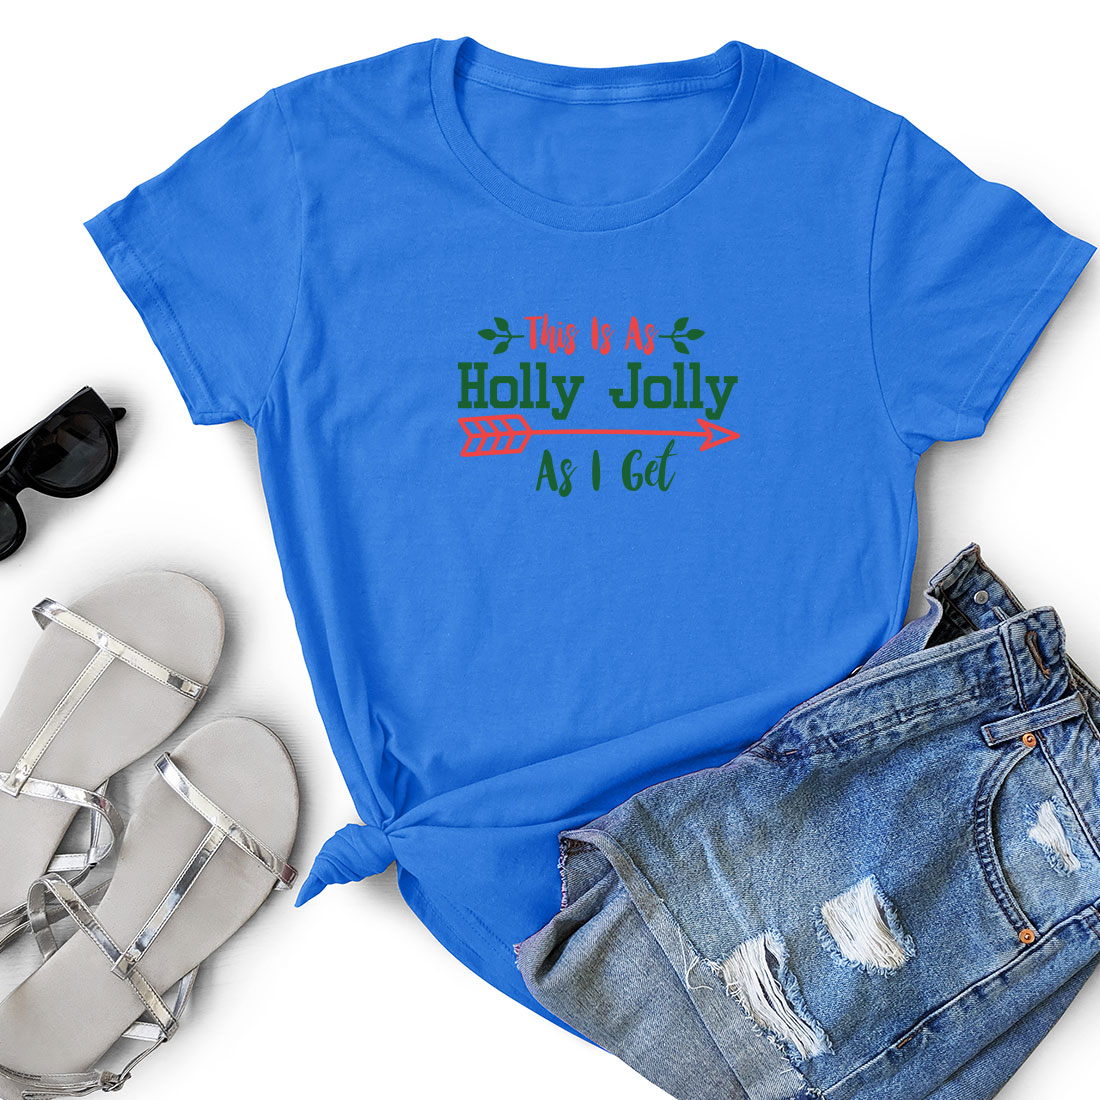 Blue t - shirt that says holly jolly as i get.